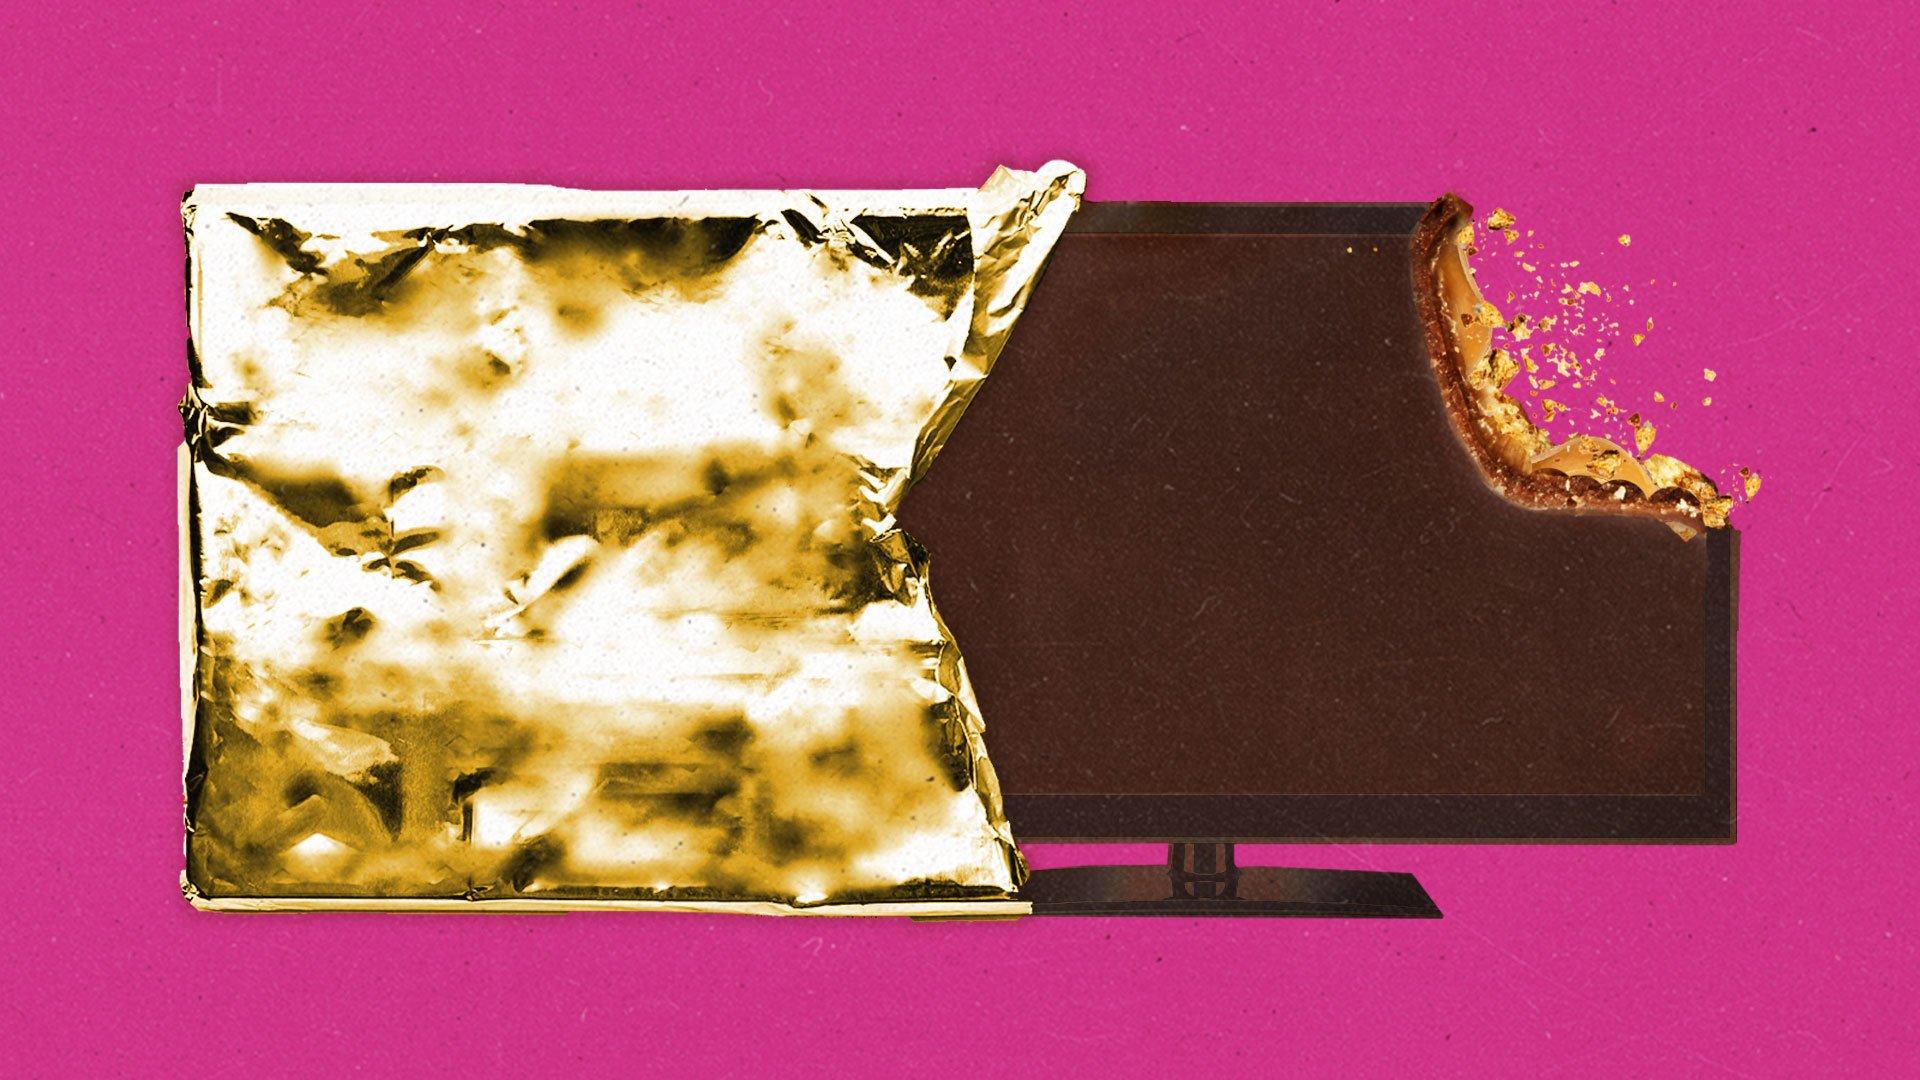 A chocolate LCD TV with a bite removed is peeking out of its gold foil wrapper.